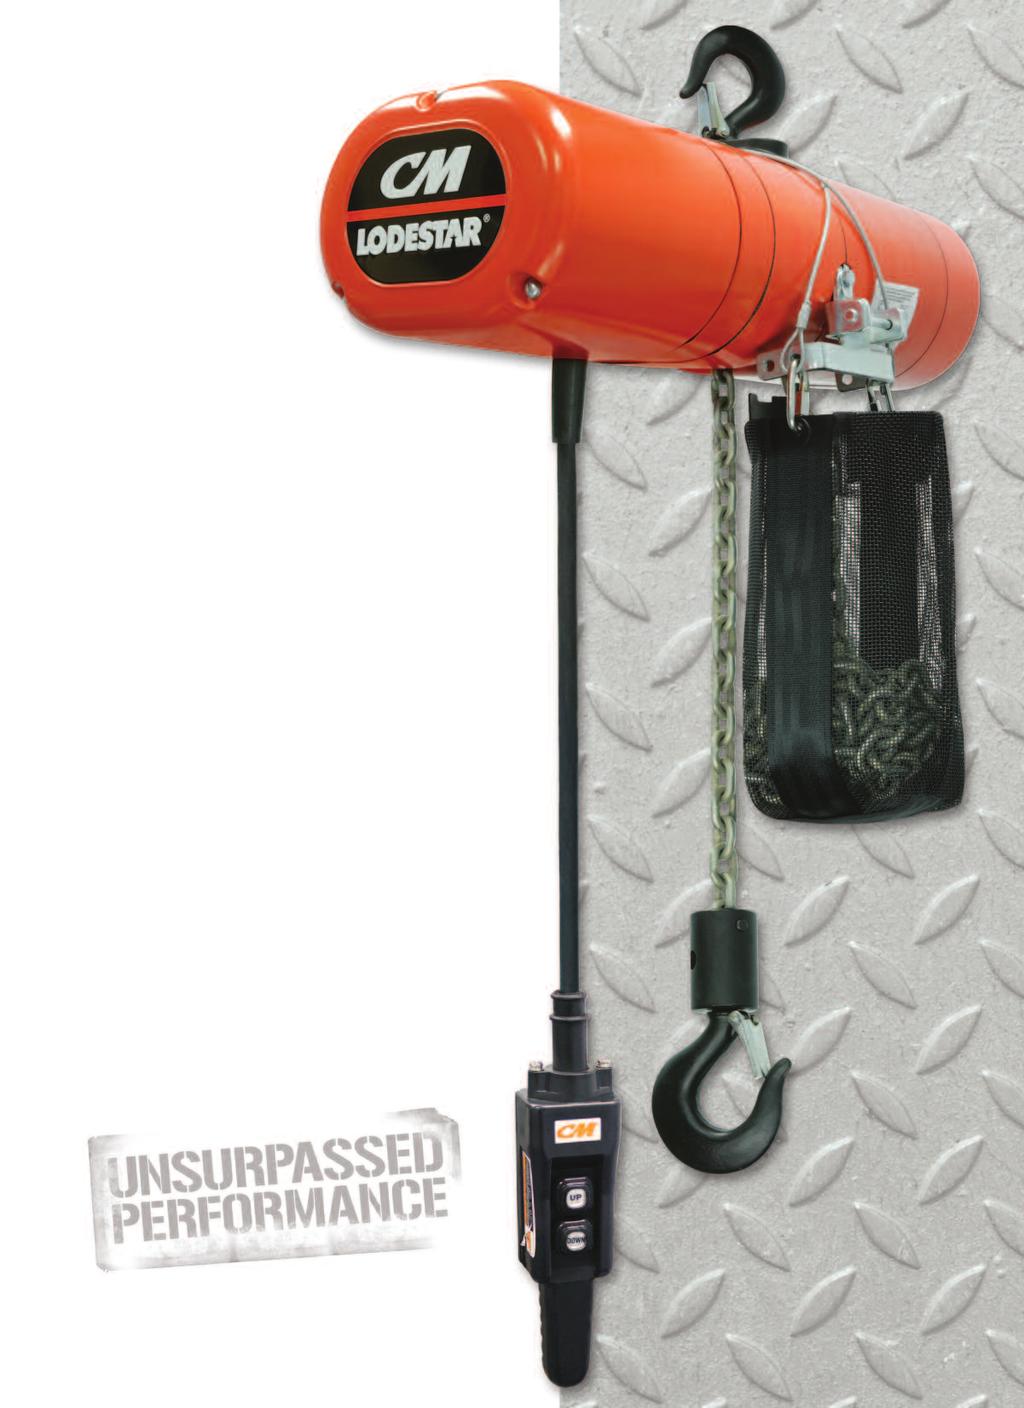 INTRODUCING THE NEXT GENERATION OF LODESTAR WITH CAPACITIES UP TO 3 TONS Columbus McKinnon Corporation, the industry leader in quality lifting and positioning equipment for hoist operators around the